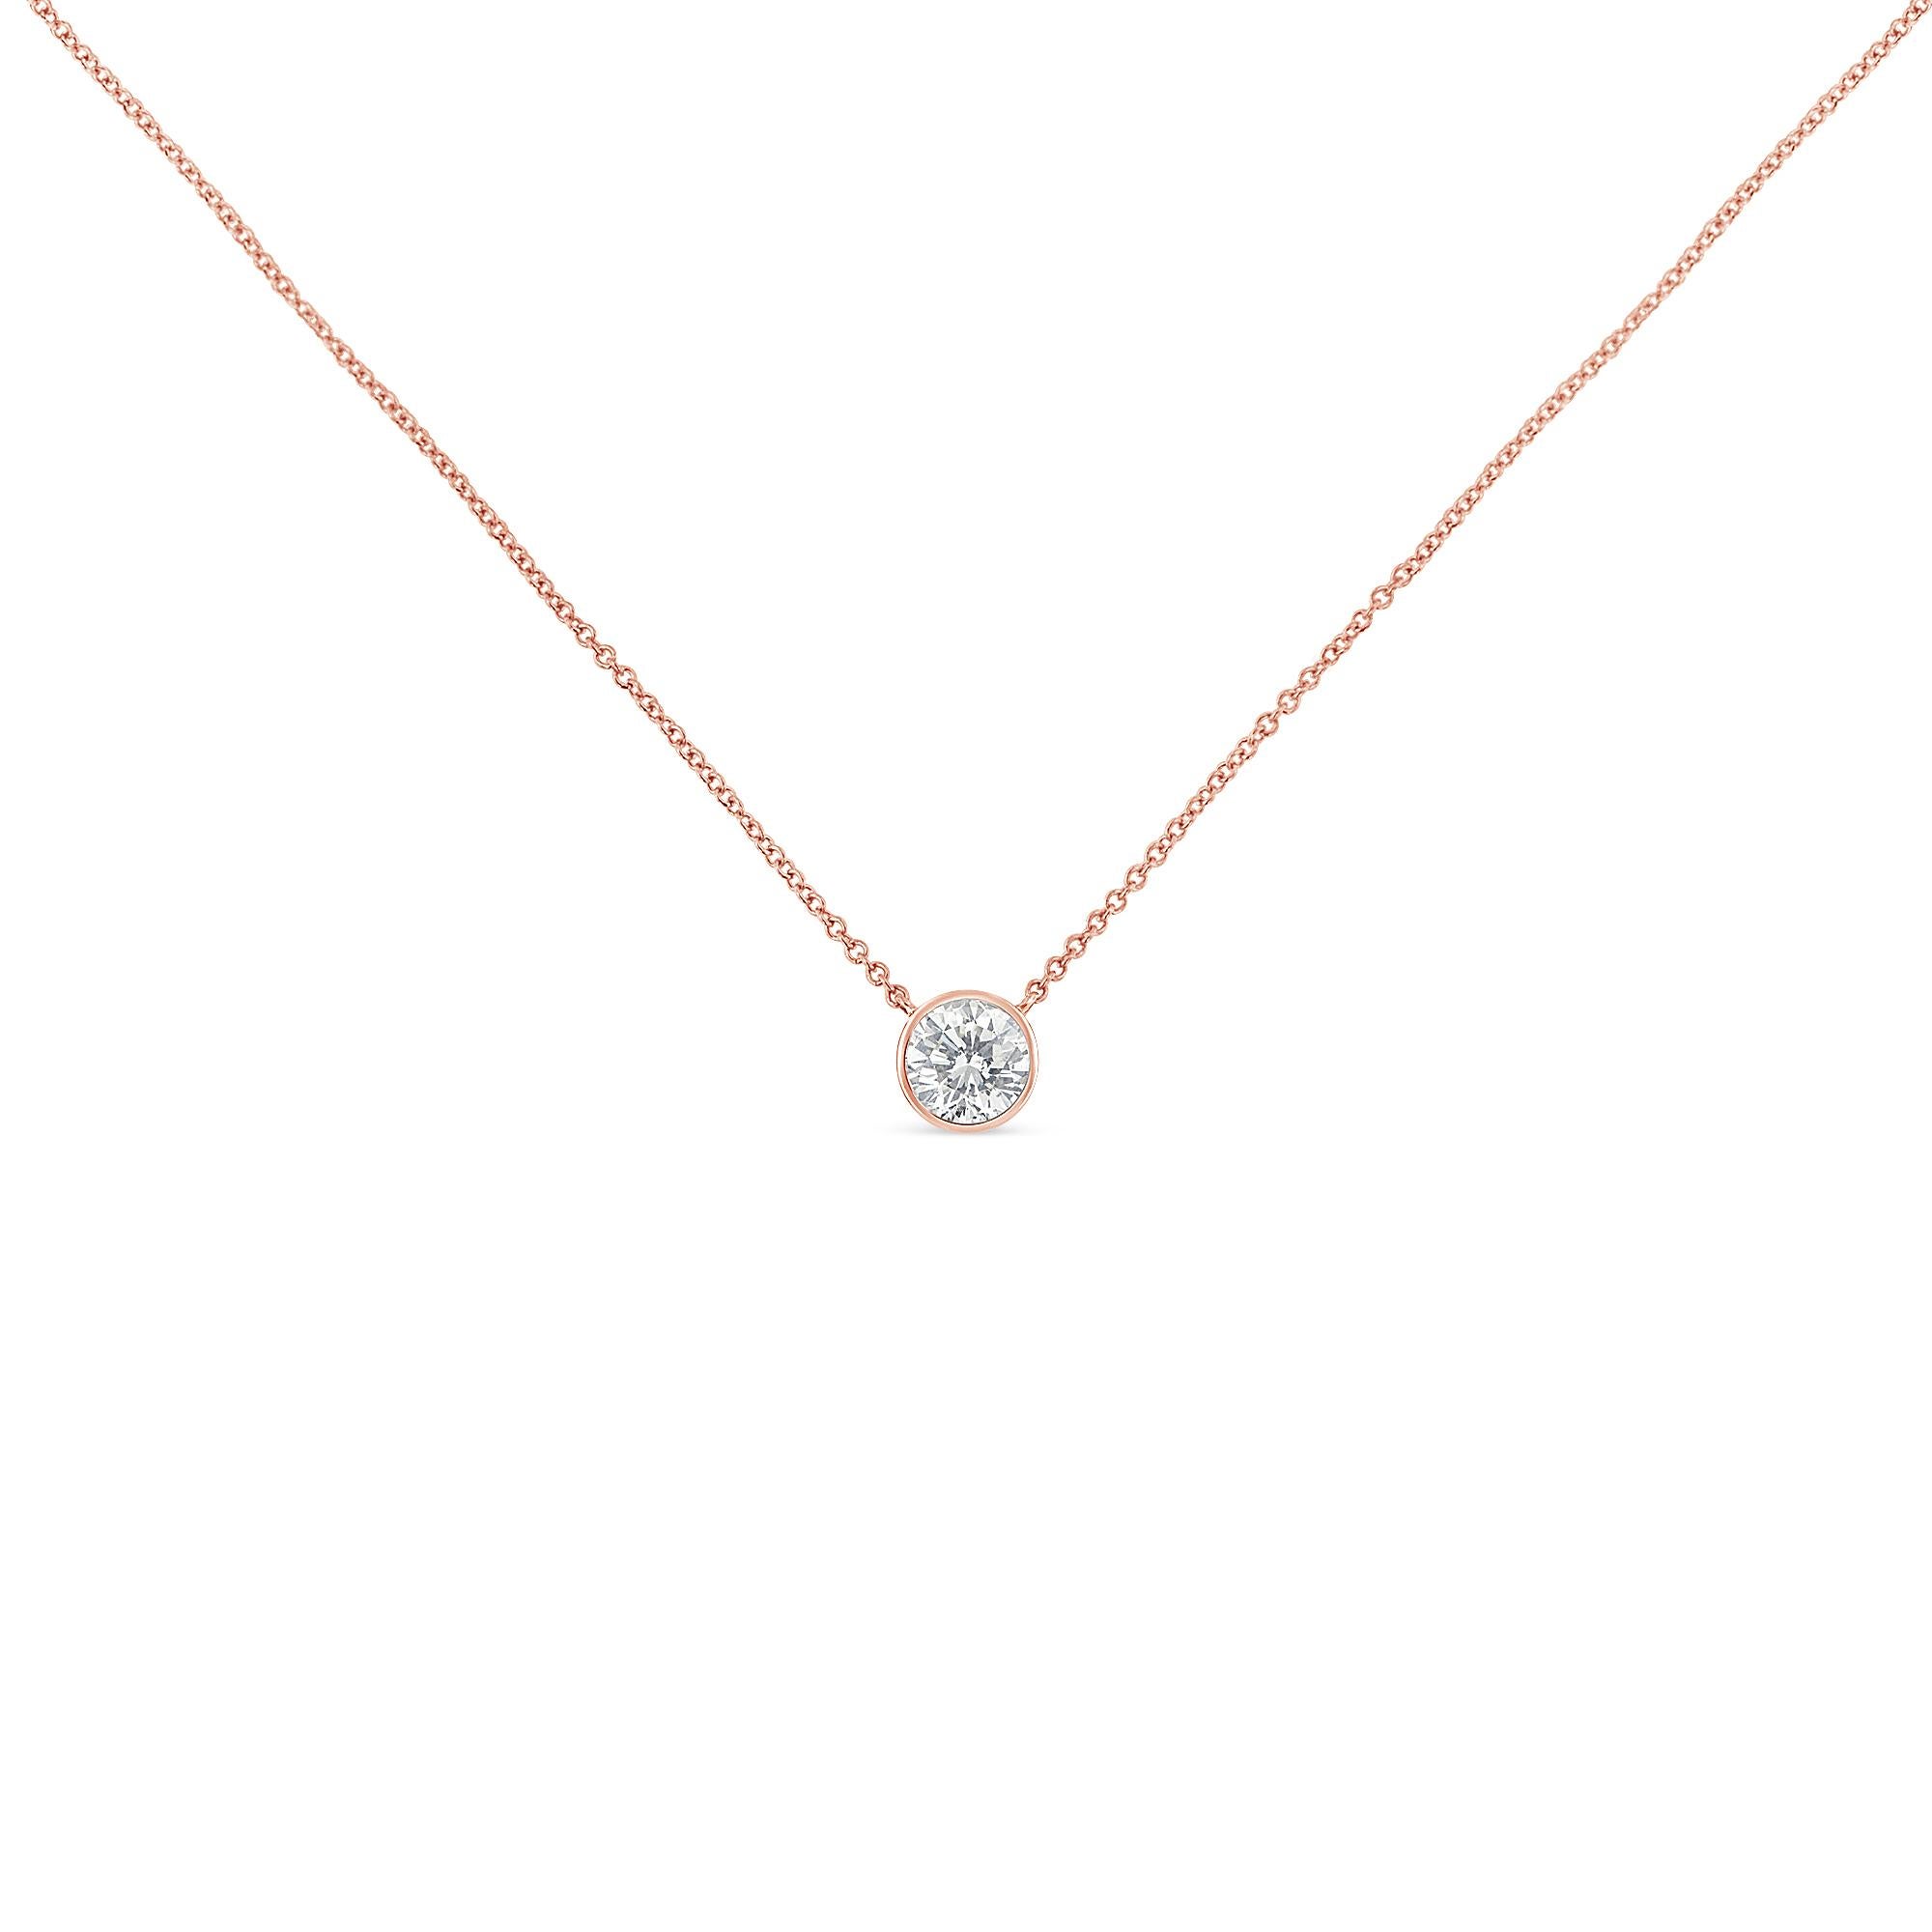 A twinkling 1/3ct round diamond rests in a soft bezel setting. Anchored on each side, a cable chain holds the pendant in place. This 14k rose plated sterling silver necklace is the perfect option for everyday wear. This beautiful necklace includes